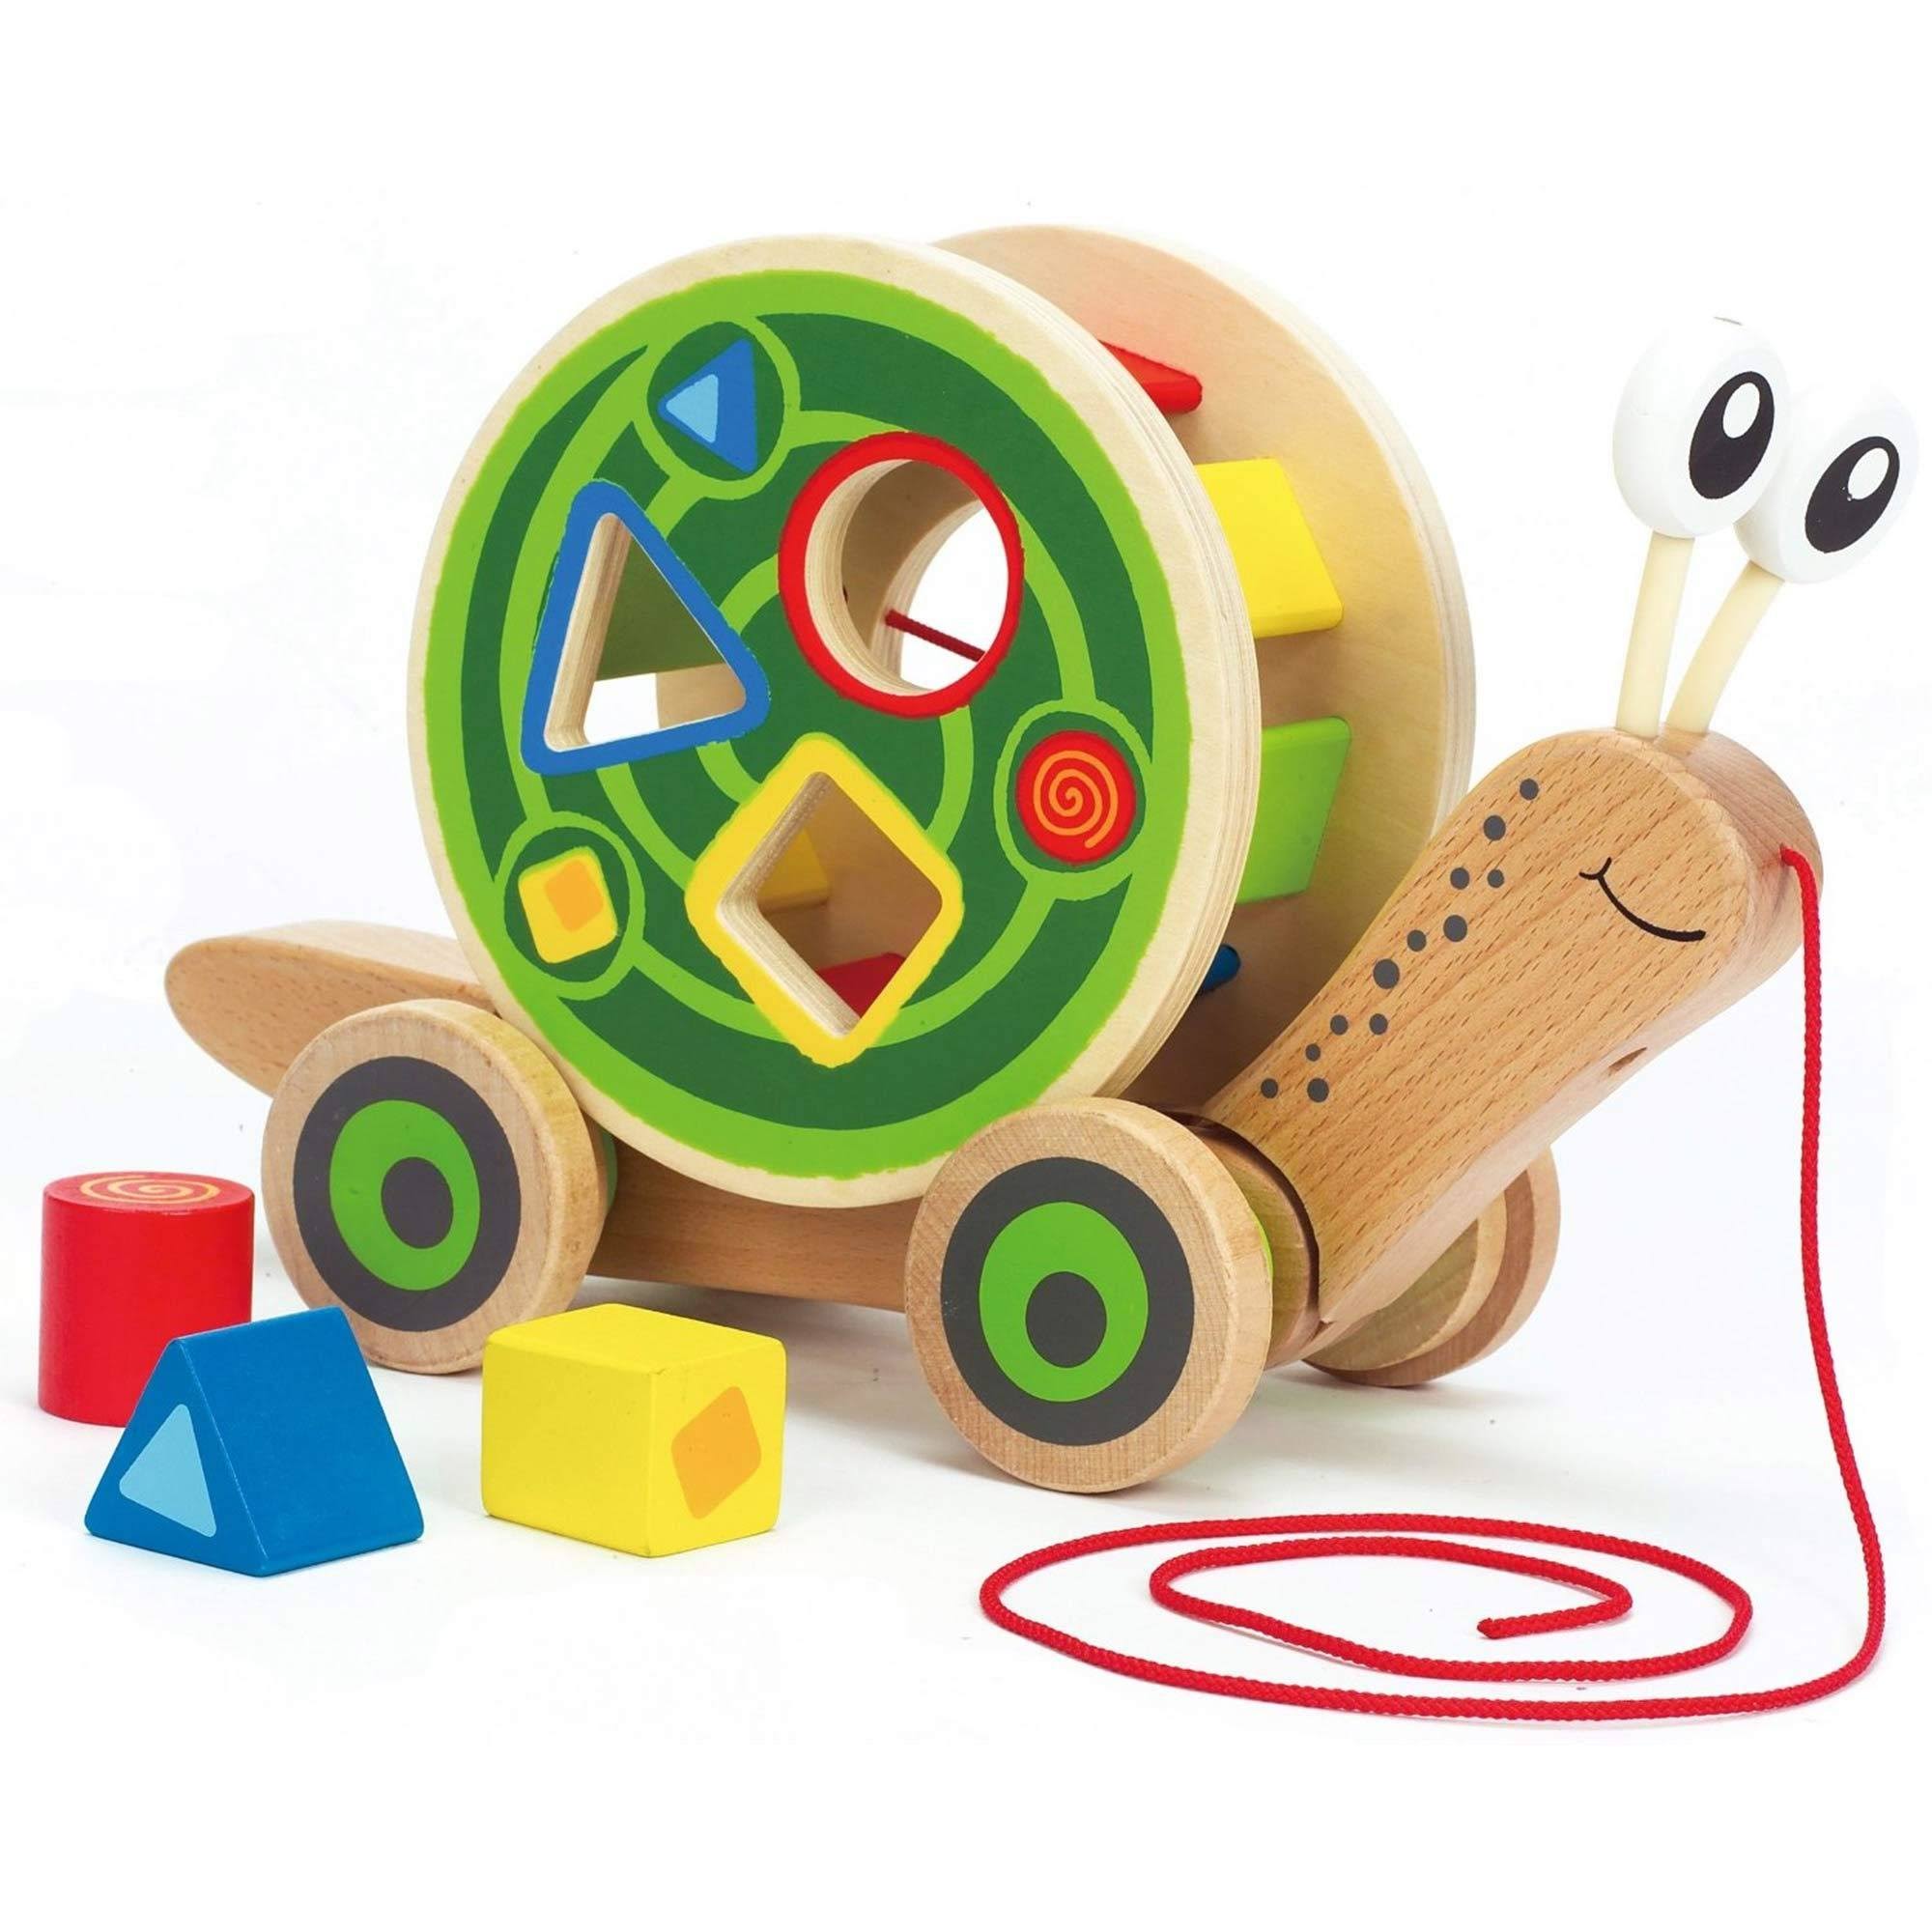 Hape Pull and Walk-A-Long Wooden Snail Toy